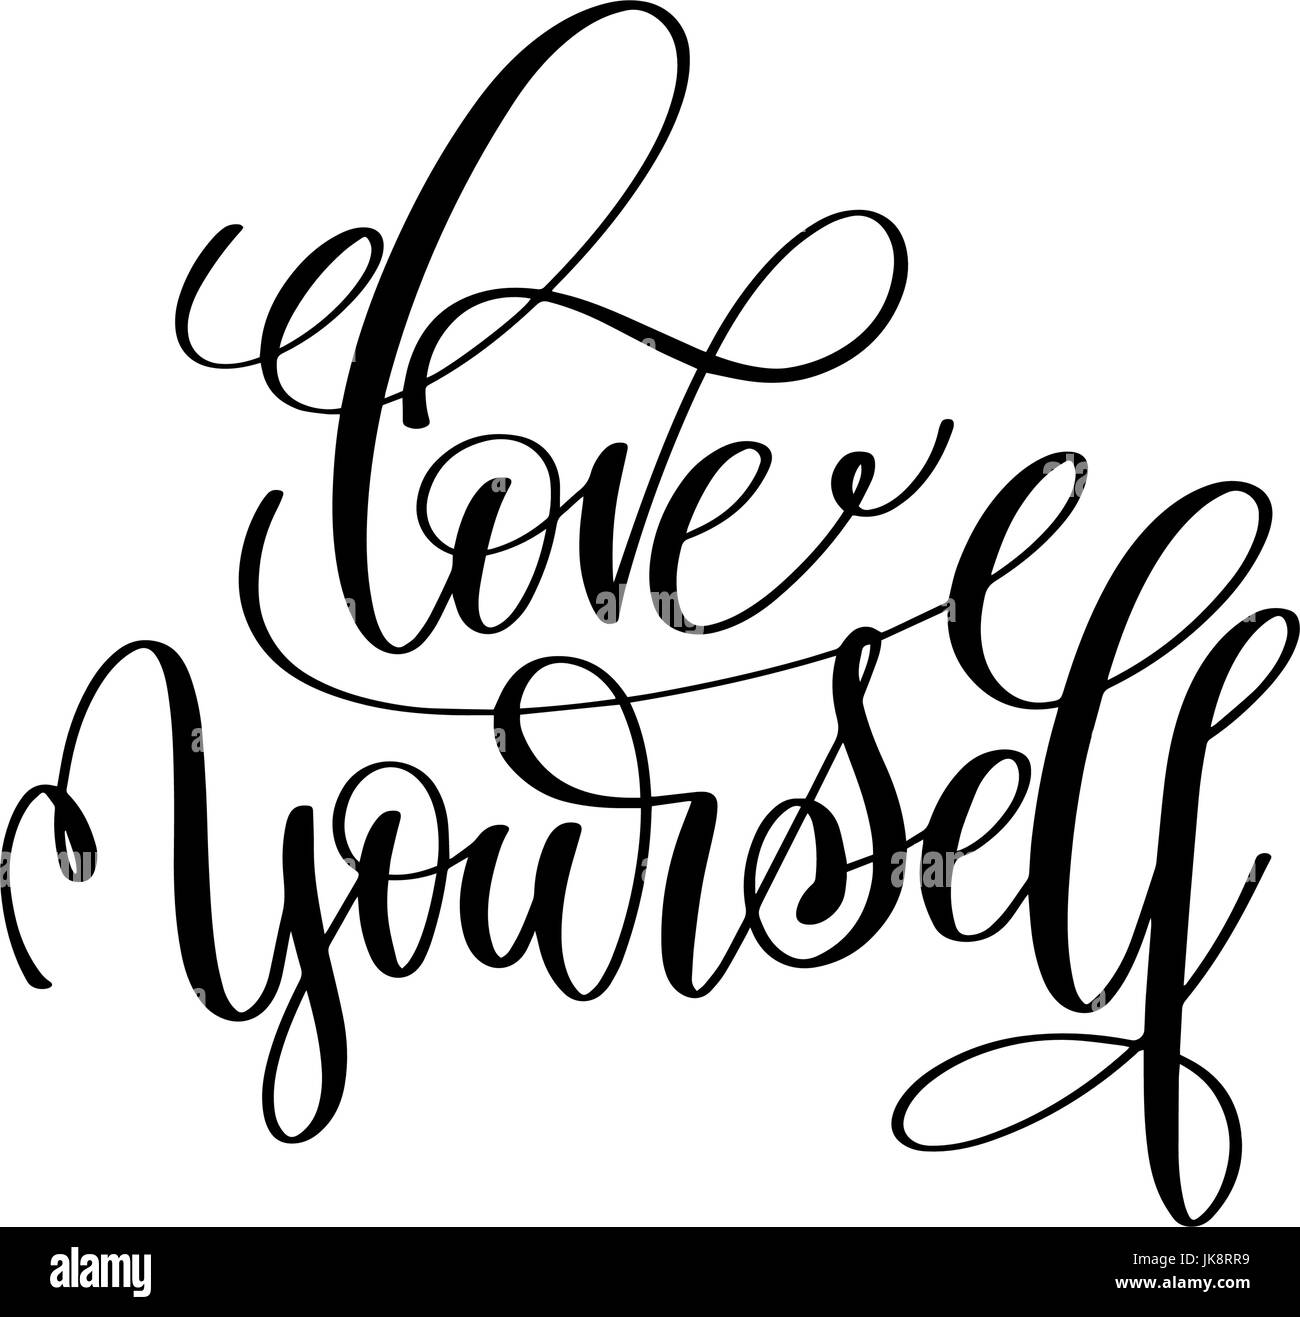 Love yourself word Cut Out Stock Images & Pictures - Page 2 - Alamy